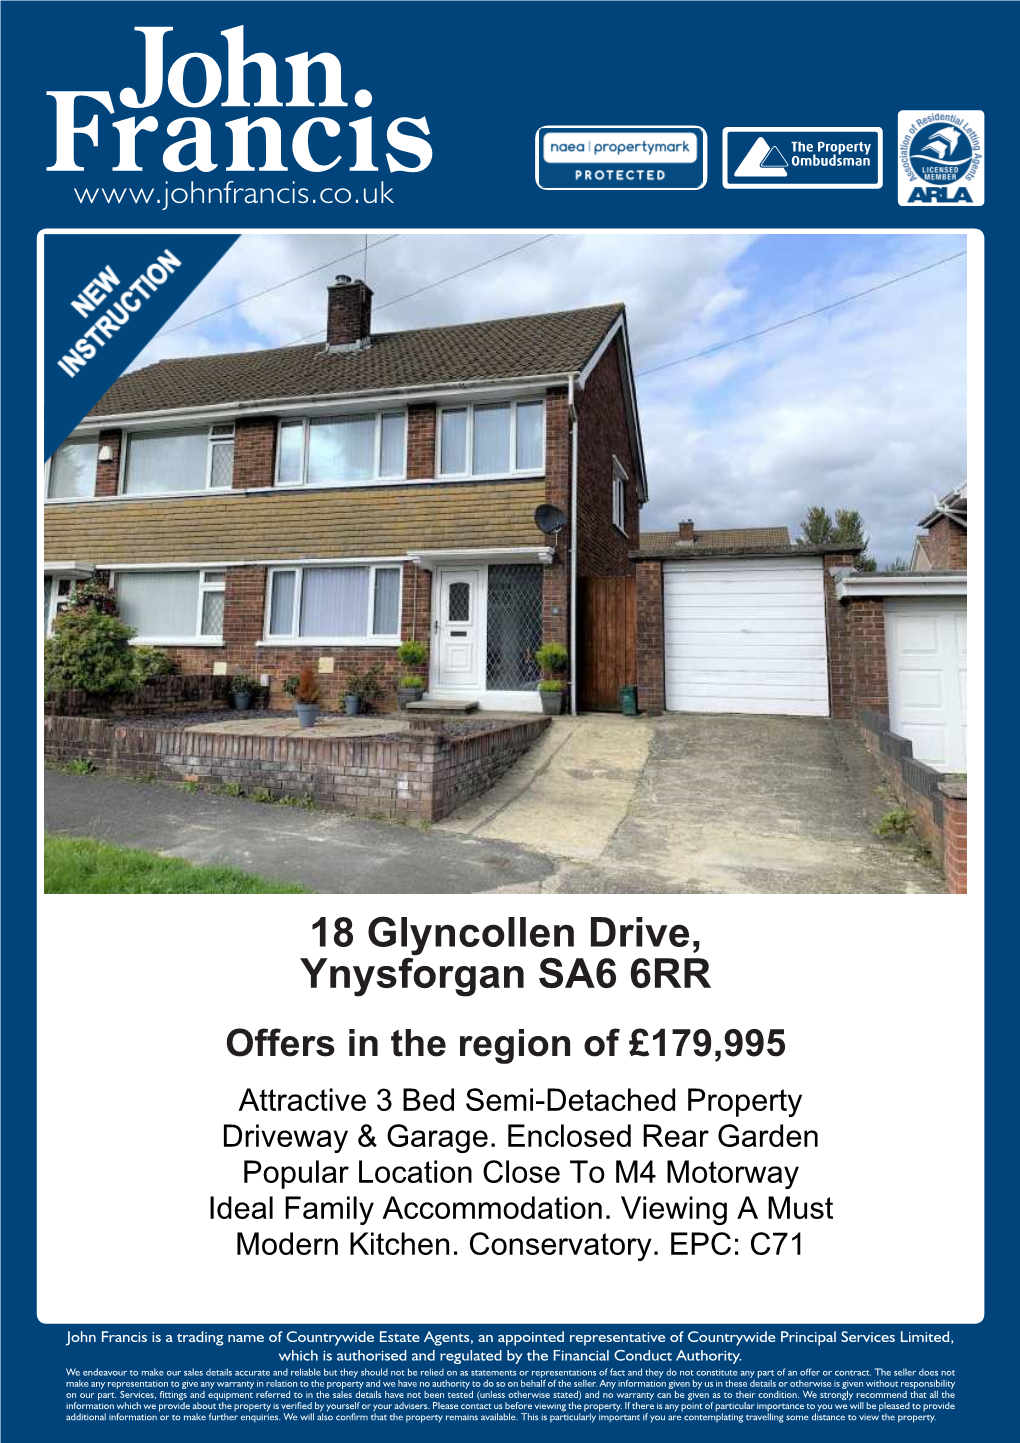 18 Glyncollen Drive, Ynysforgan SA6 6RR Offers in the Region of £179,995 • Attractive 3 Bed Semi-Detached Property • Driveway & Garage